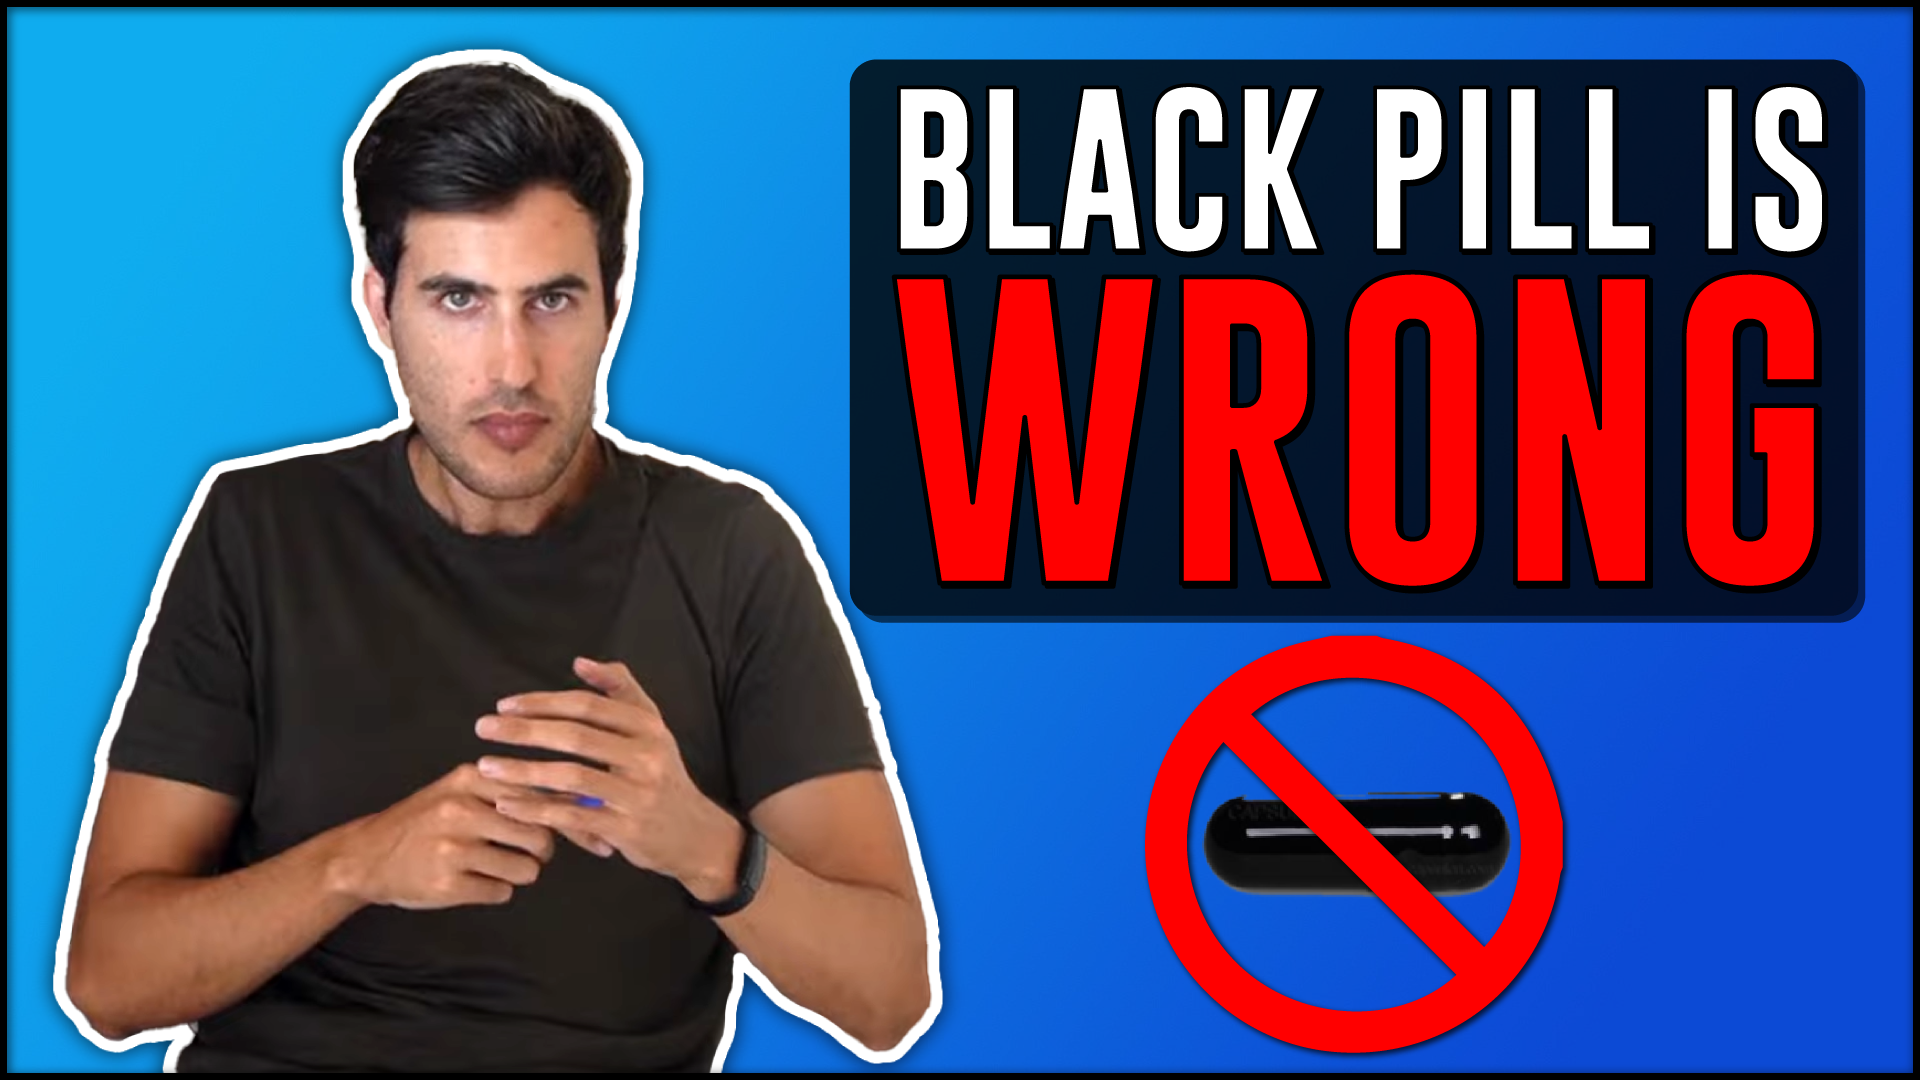 Why is The Black Pill WRONG? (It Will POSION & DESTORY You)